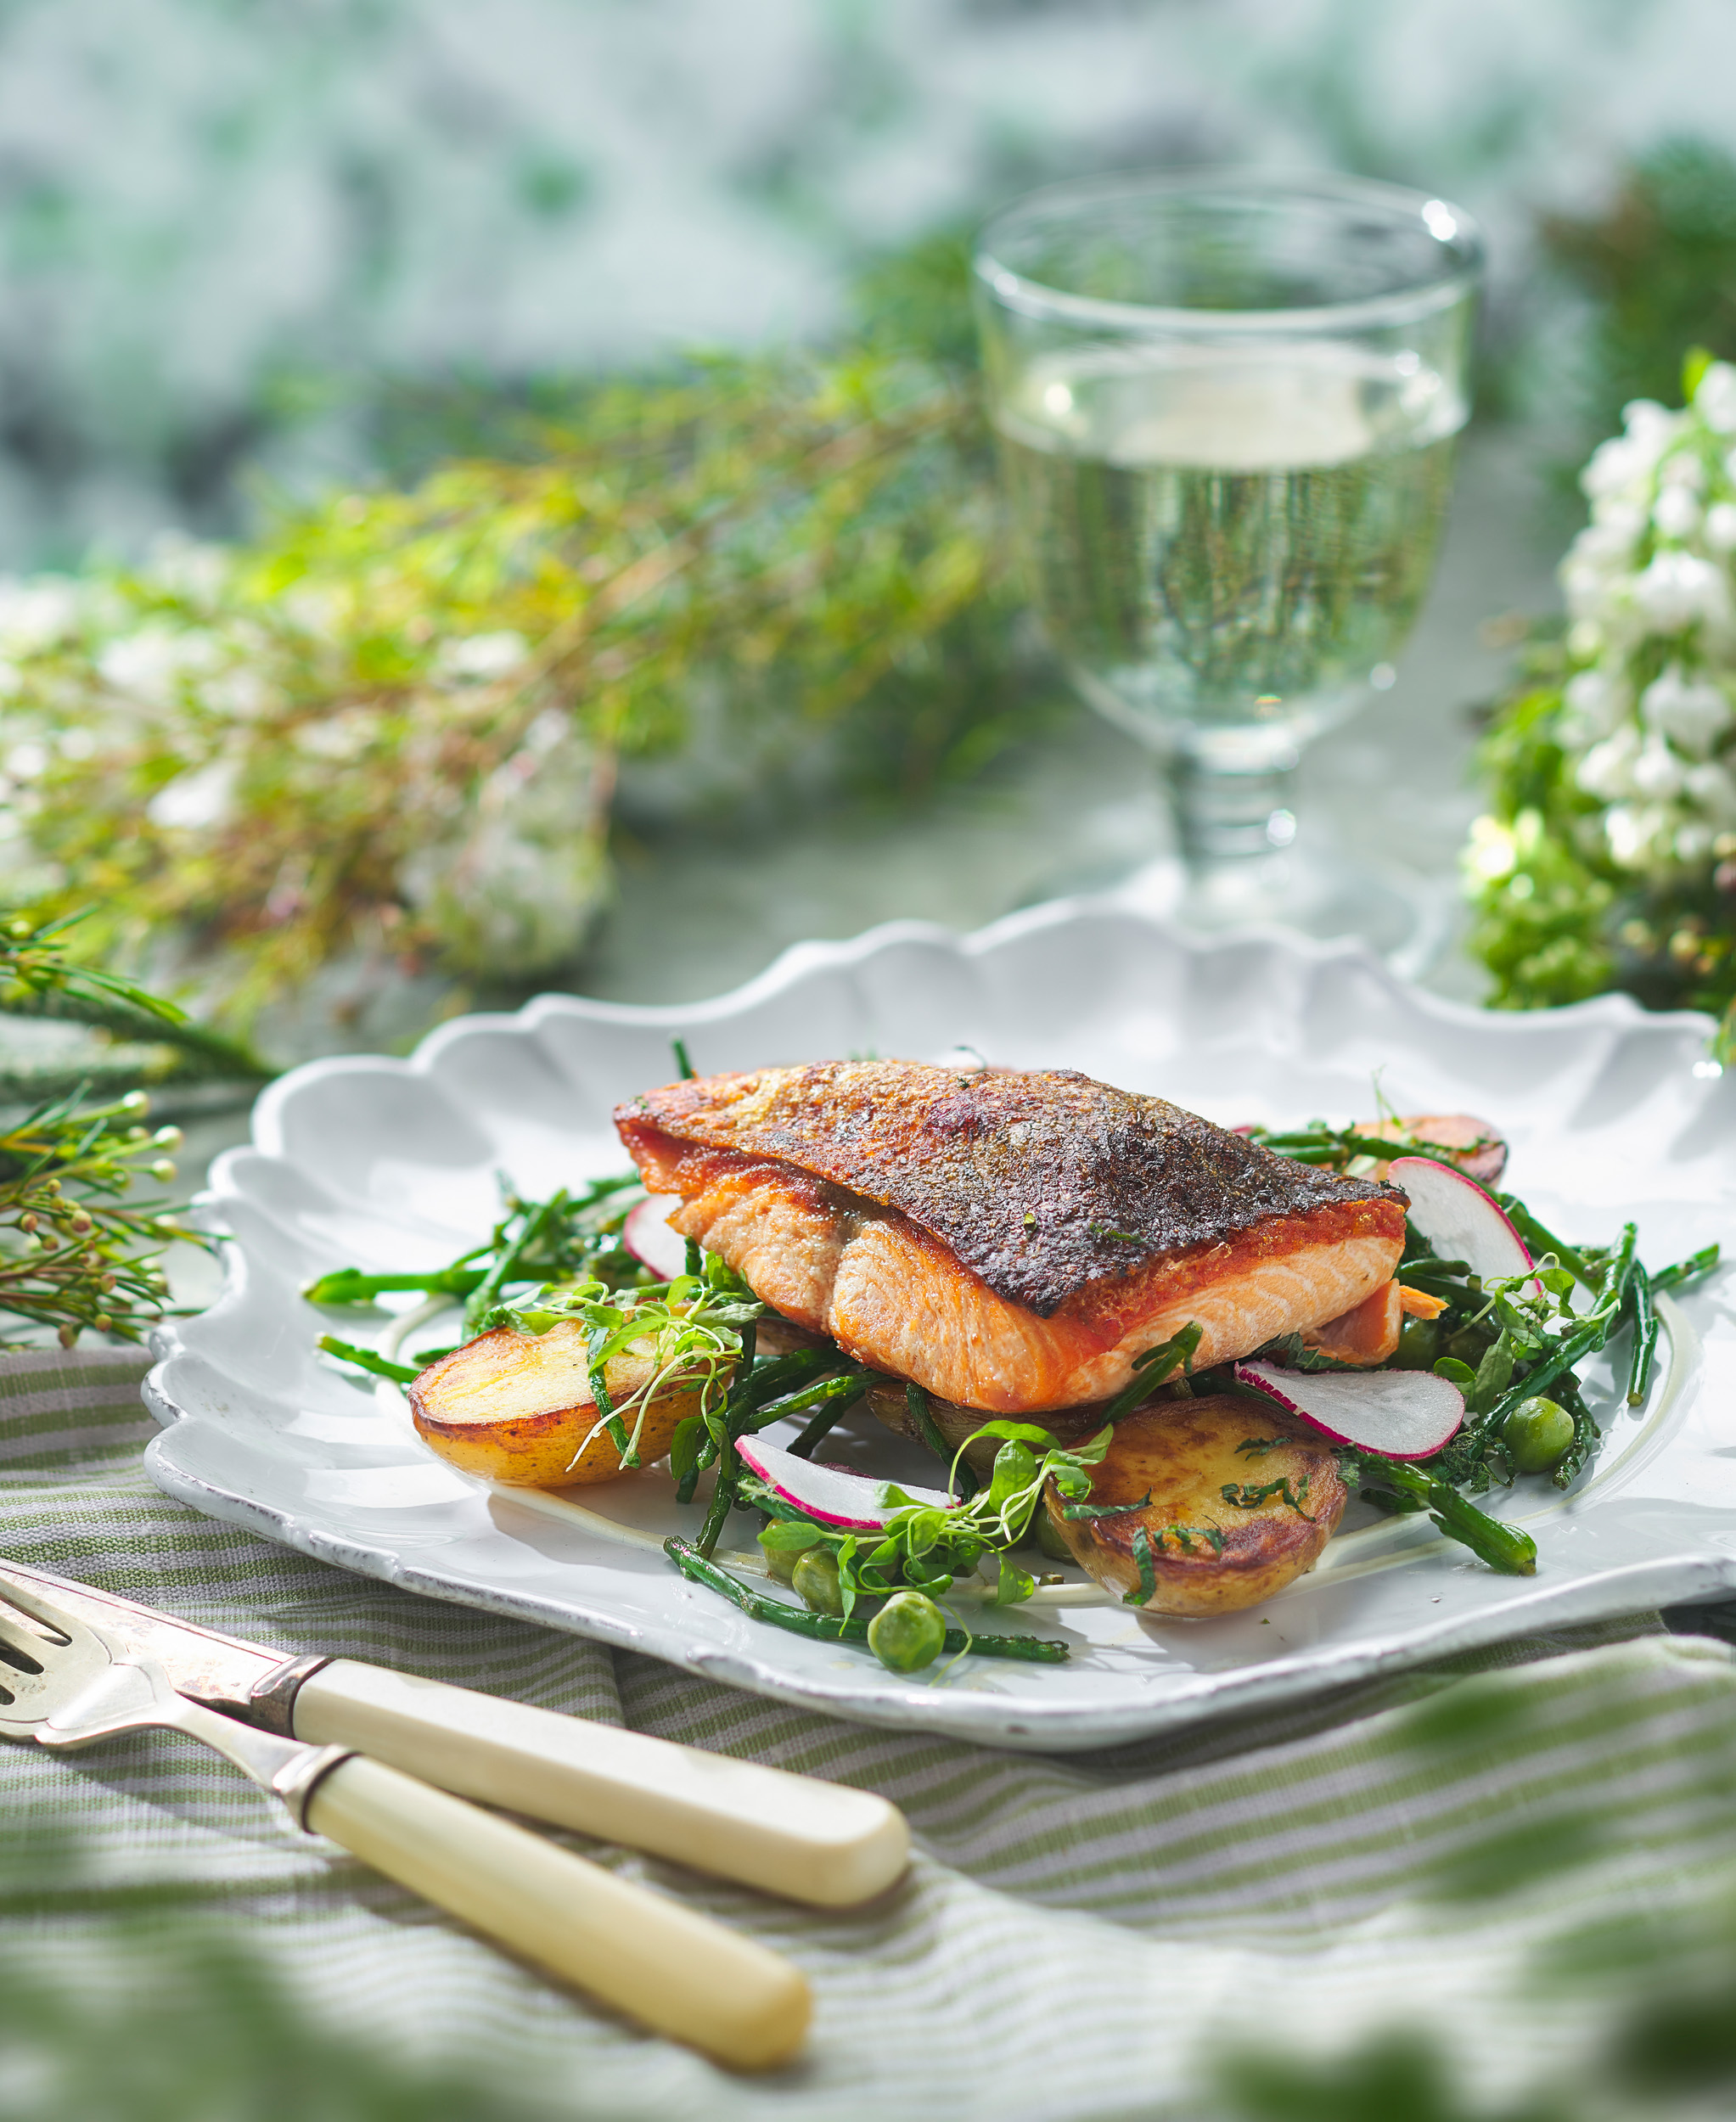 https://www.drakeandmorgan.co.uk/the-refinery-citypoint/wp-content/uploads/2022/05/Seafood-Trout-3.jpg